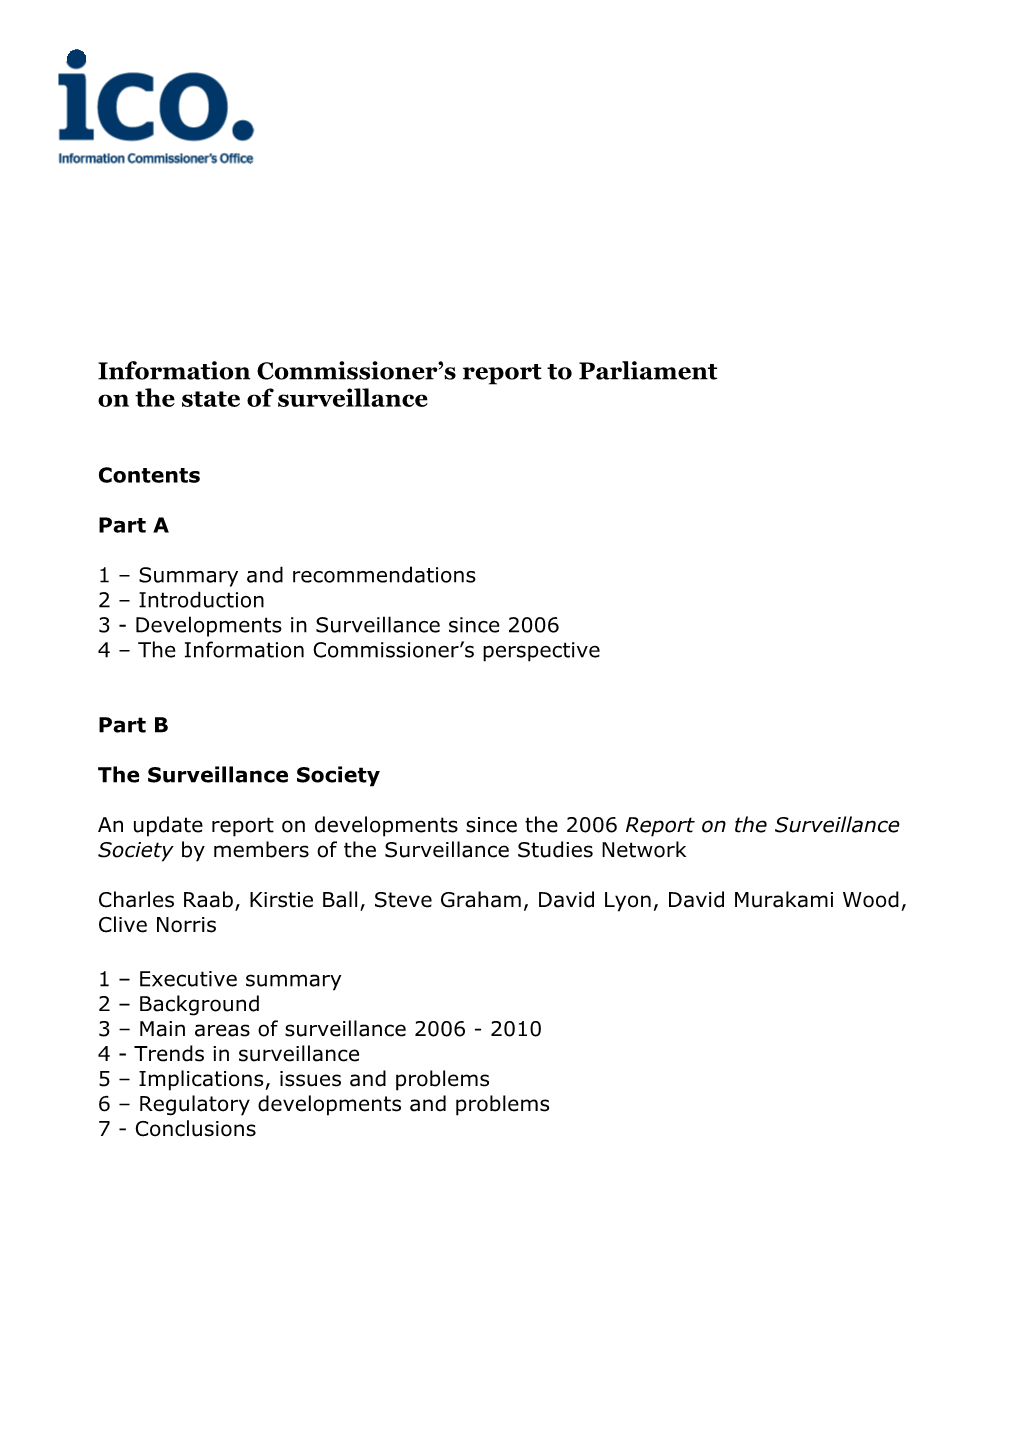 Information Commissioner's Report to Parliament on the State of Surveillance